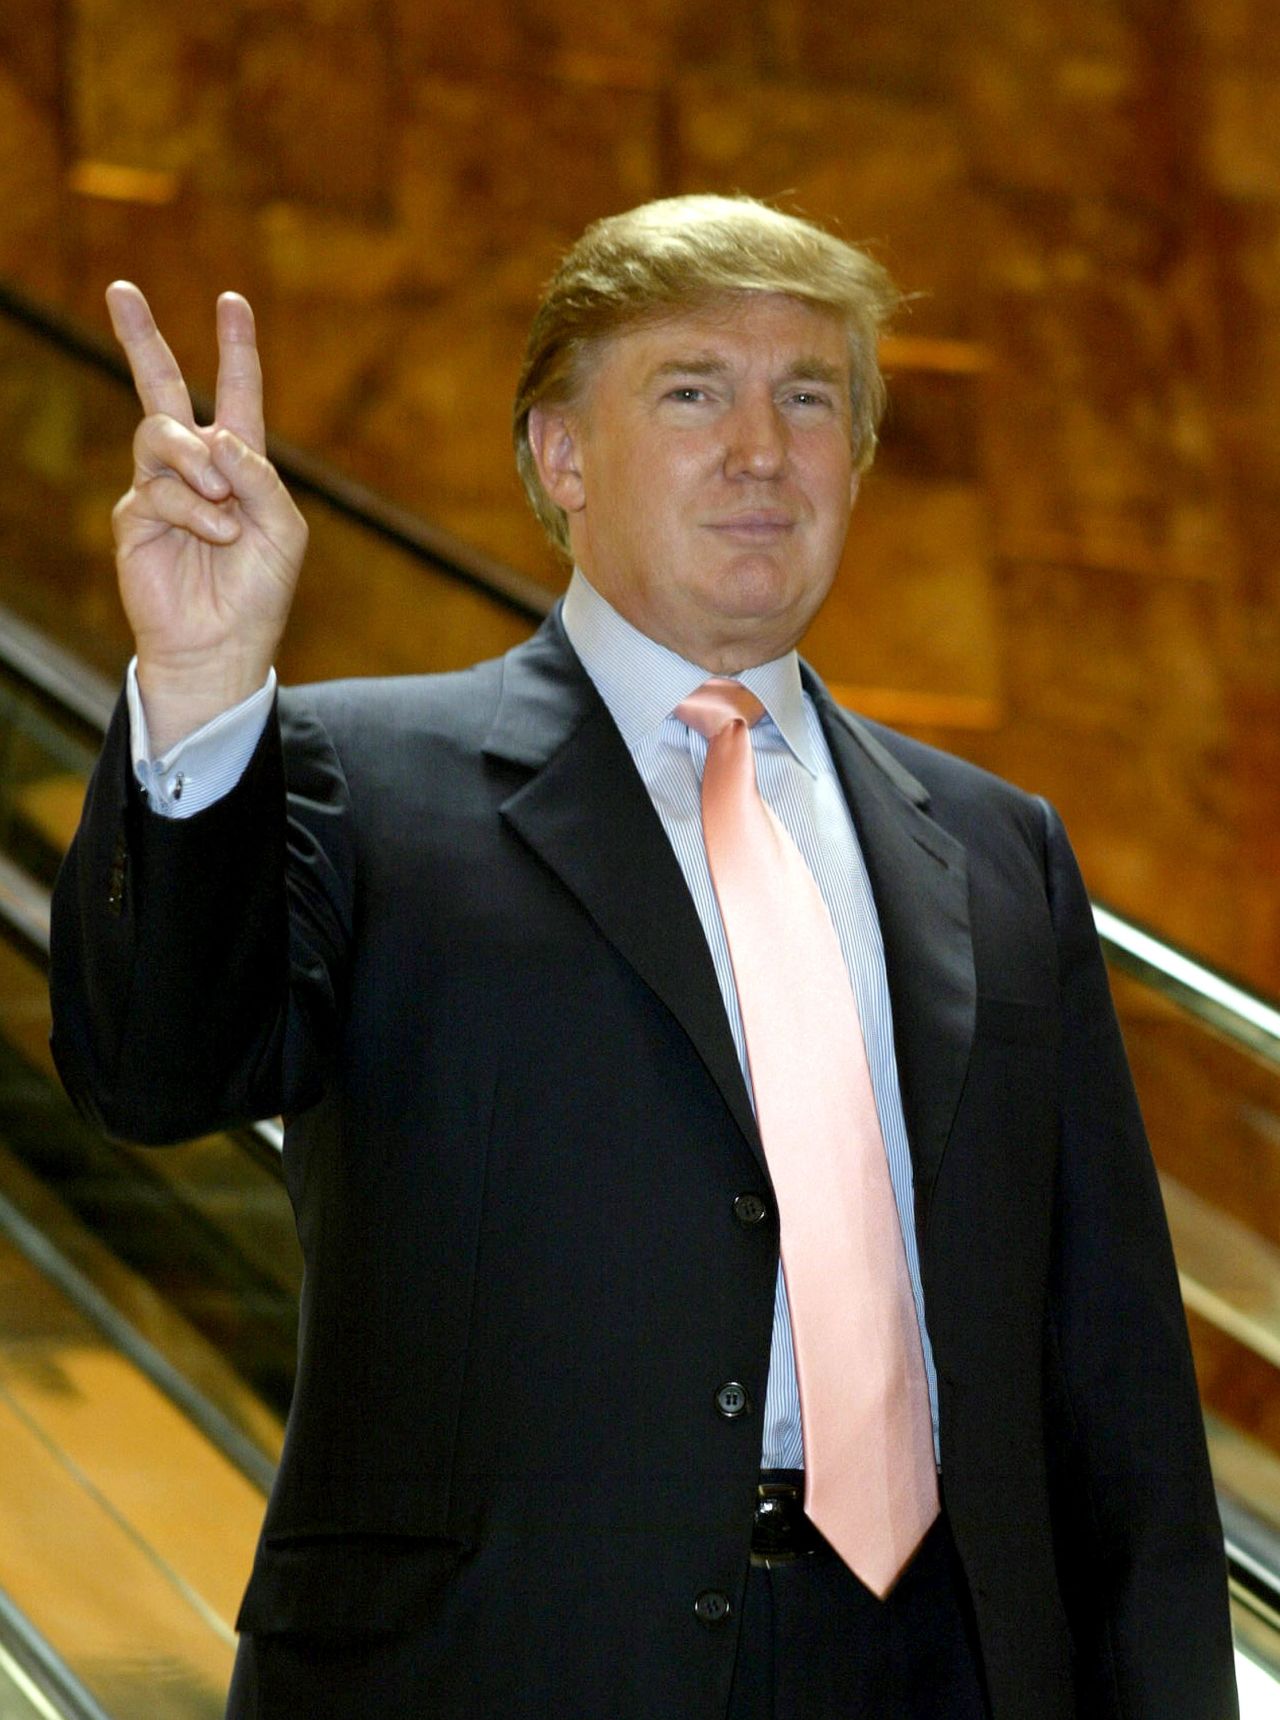 Trump arrives at "The Apprentice" casting call in Trump Tower on July 30, 2004, in New York City.